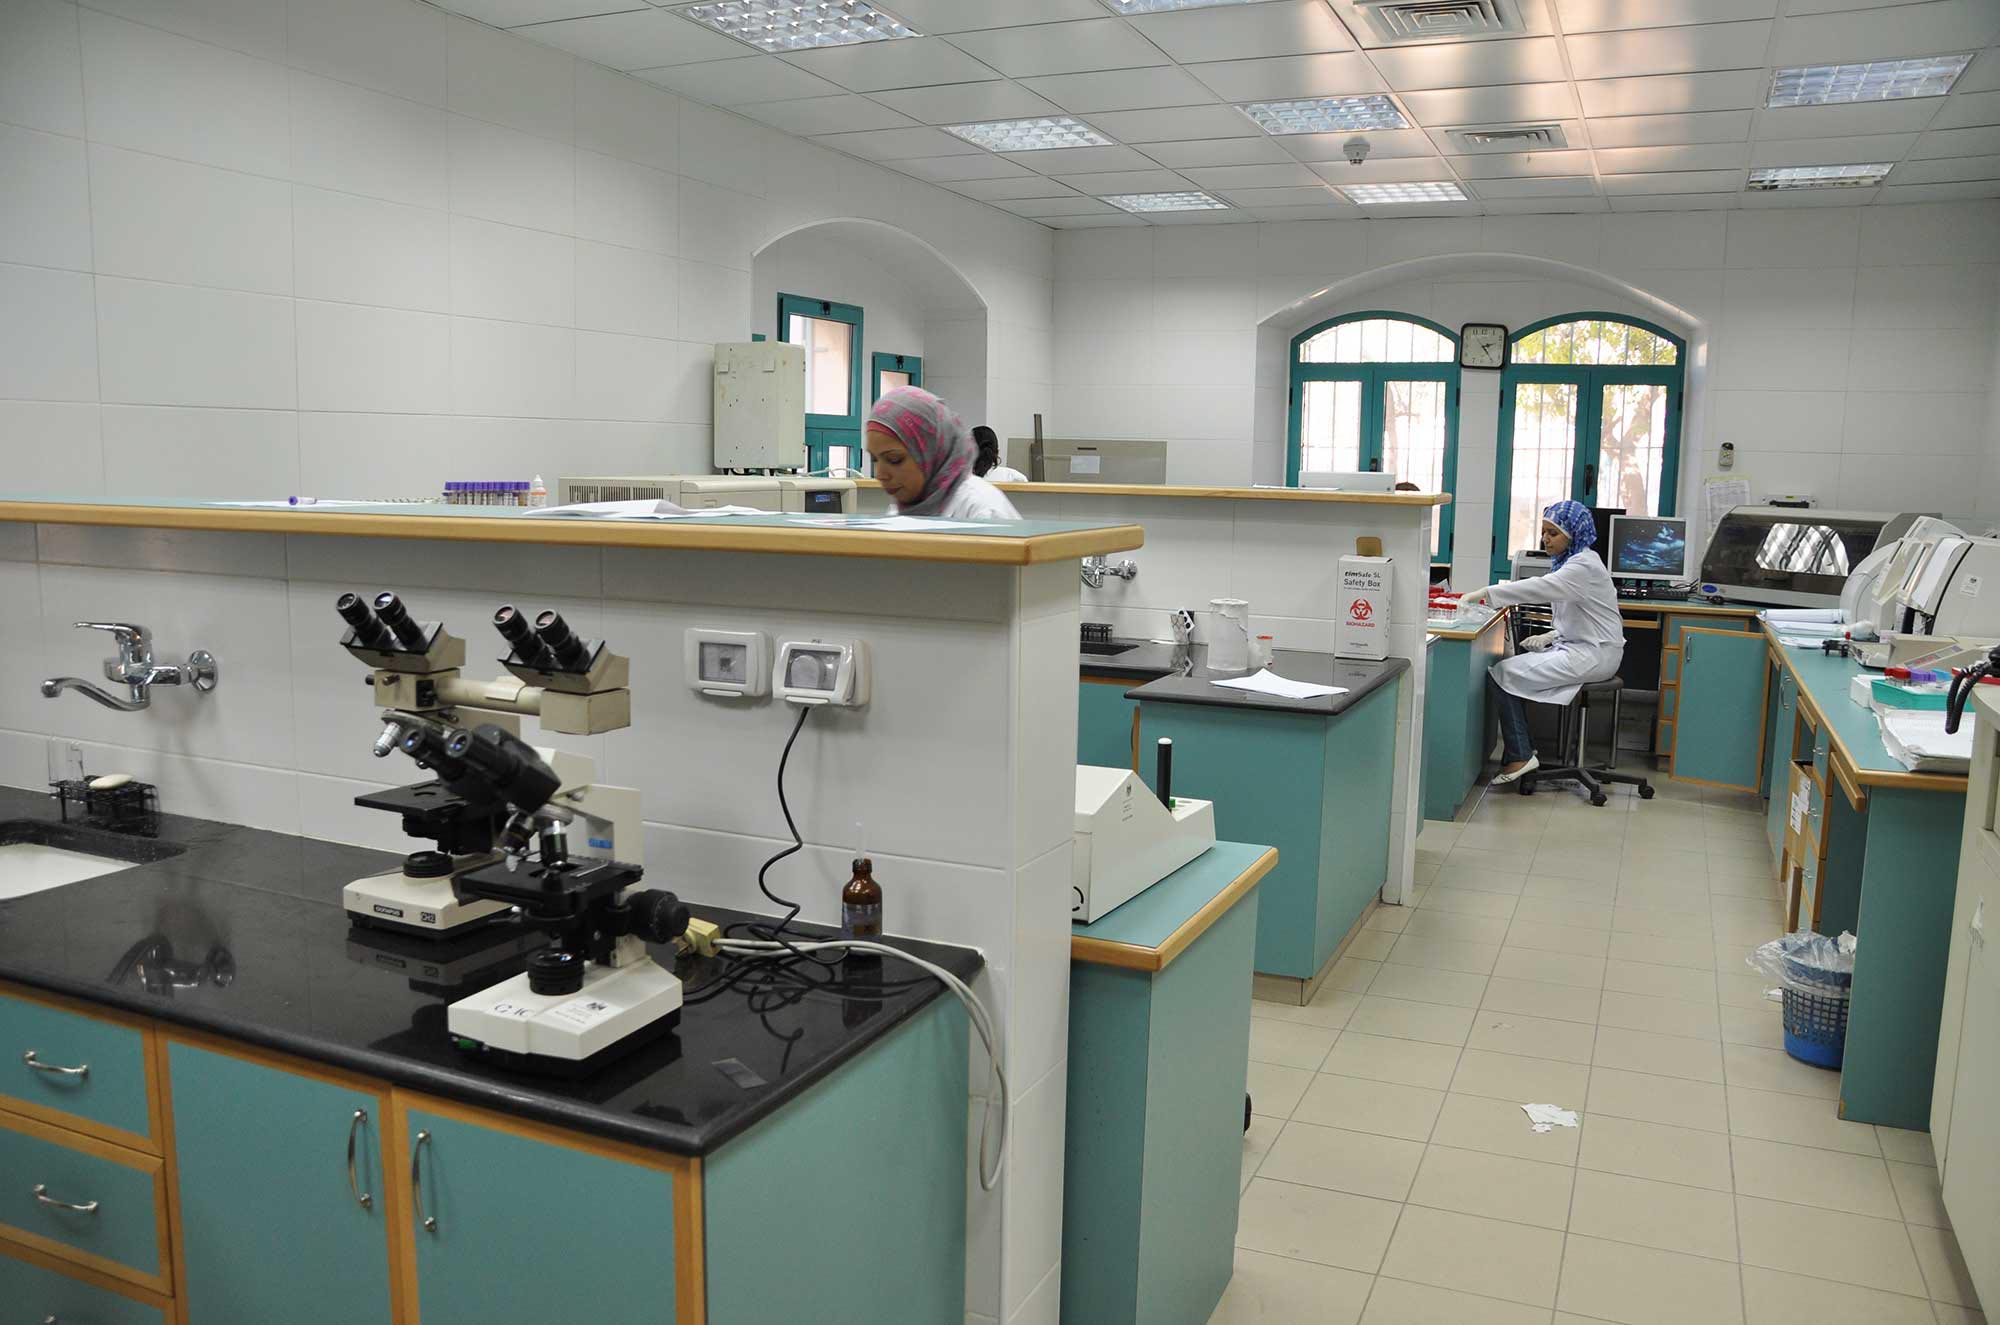 The nurses’ station at Beit Jala hospital, after Anera’s total renovation of the facility.